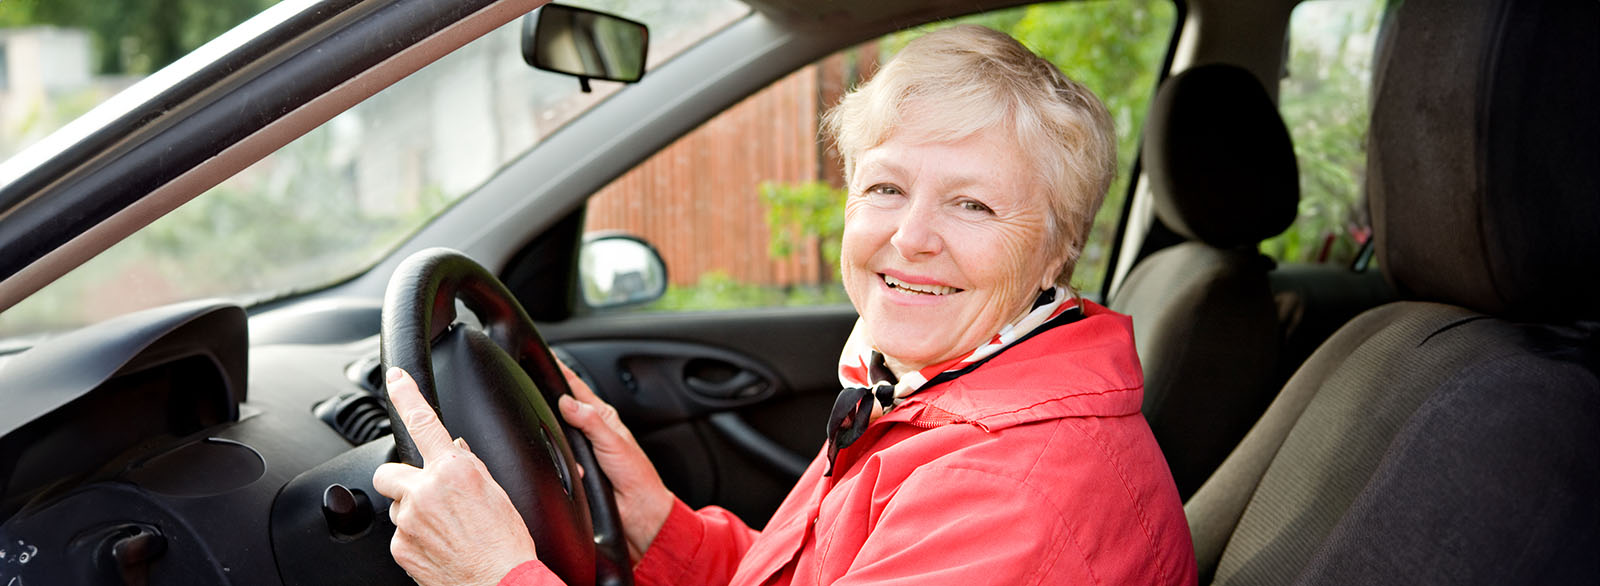 Woman in her 70s in the driver's seat of a car.